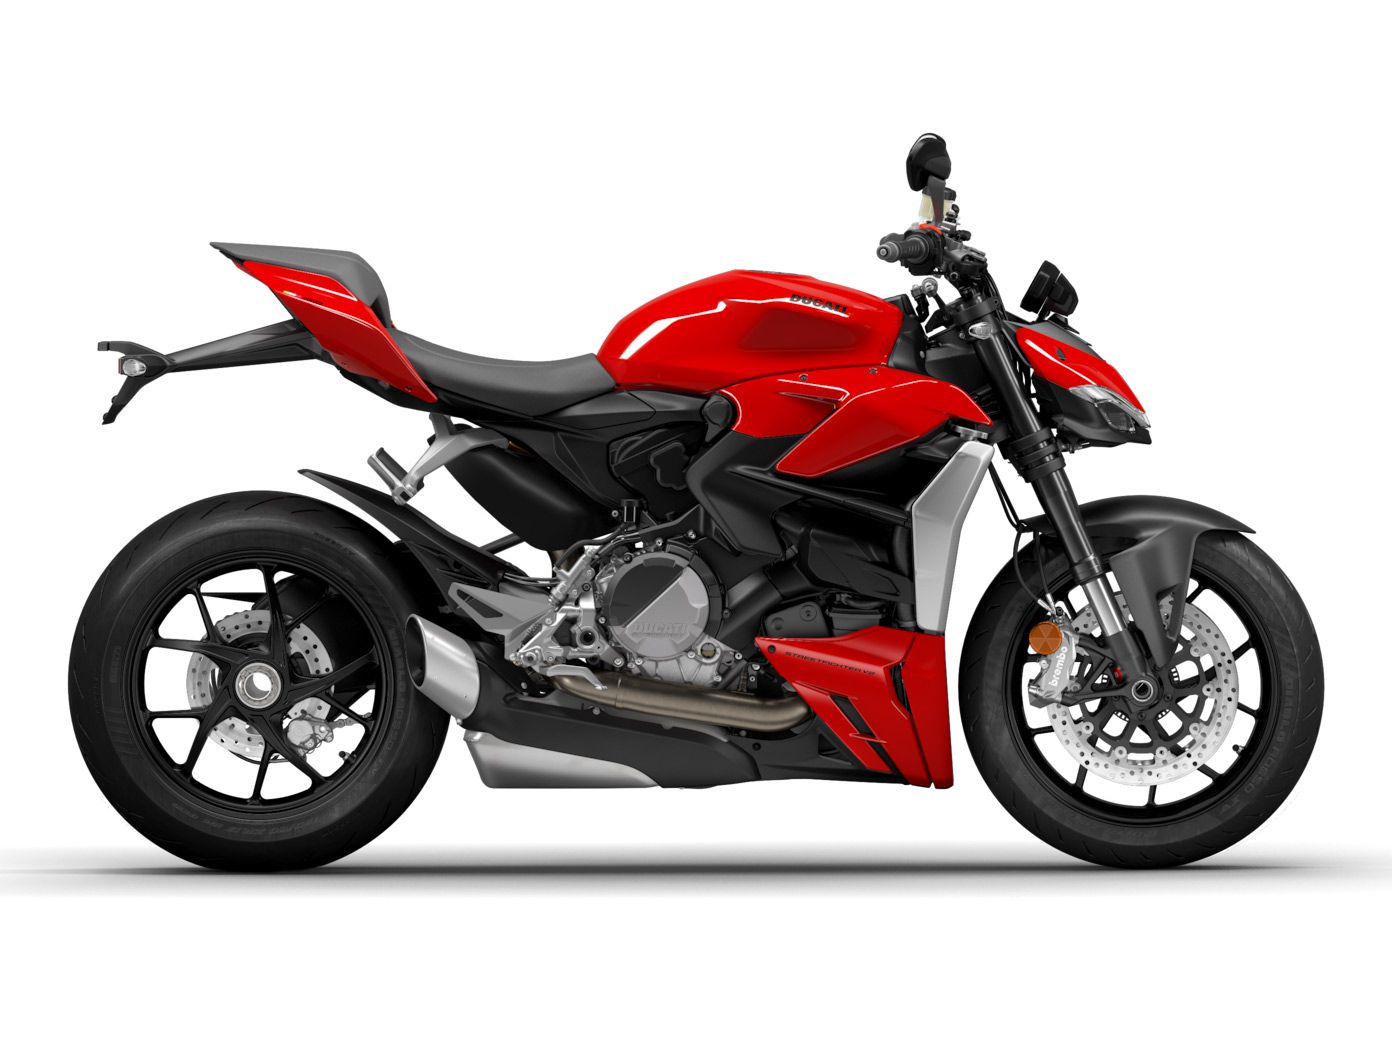 Ducati’s 2022 Streetfighter V2 has found just the right balance between power and performance with a composed chassis and 955cc twin.